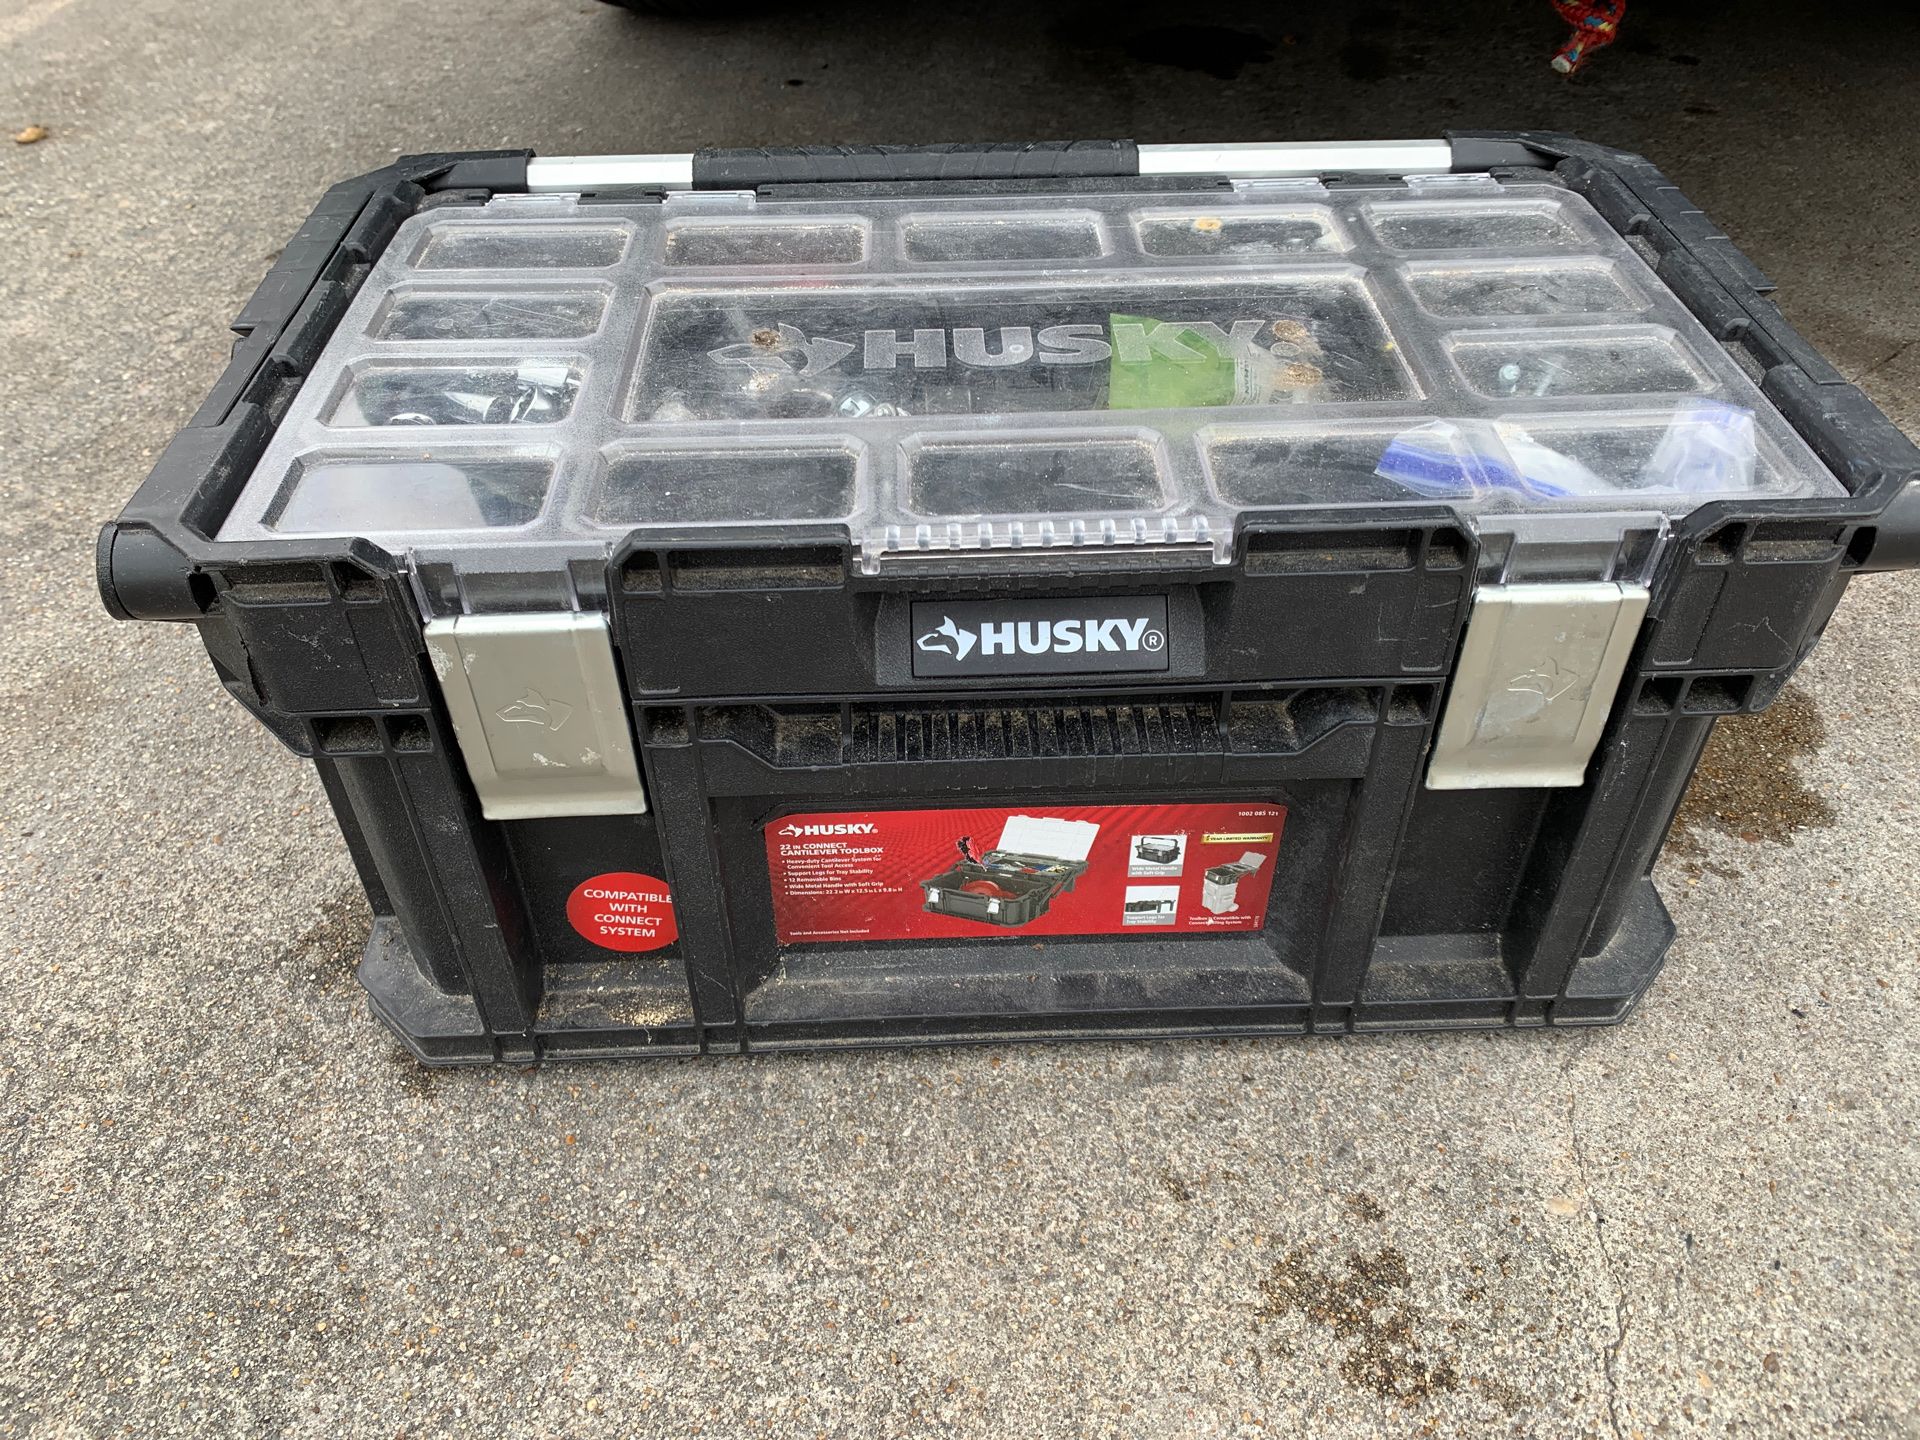 Expensive tool box filled with tools